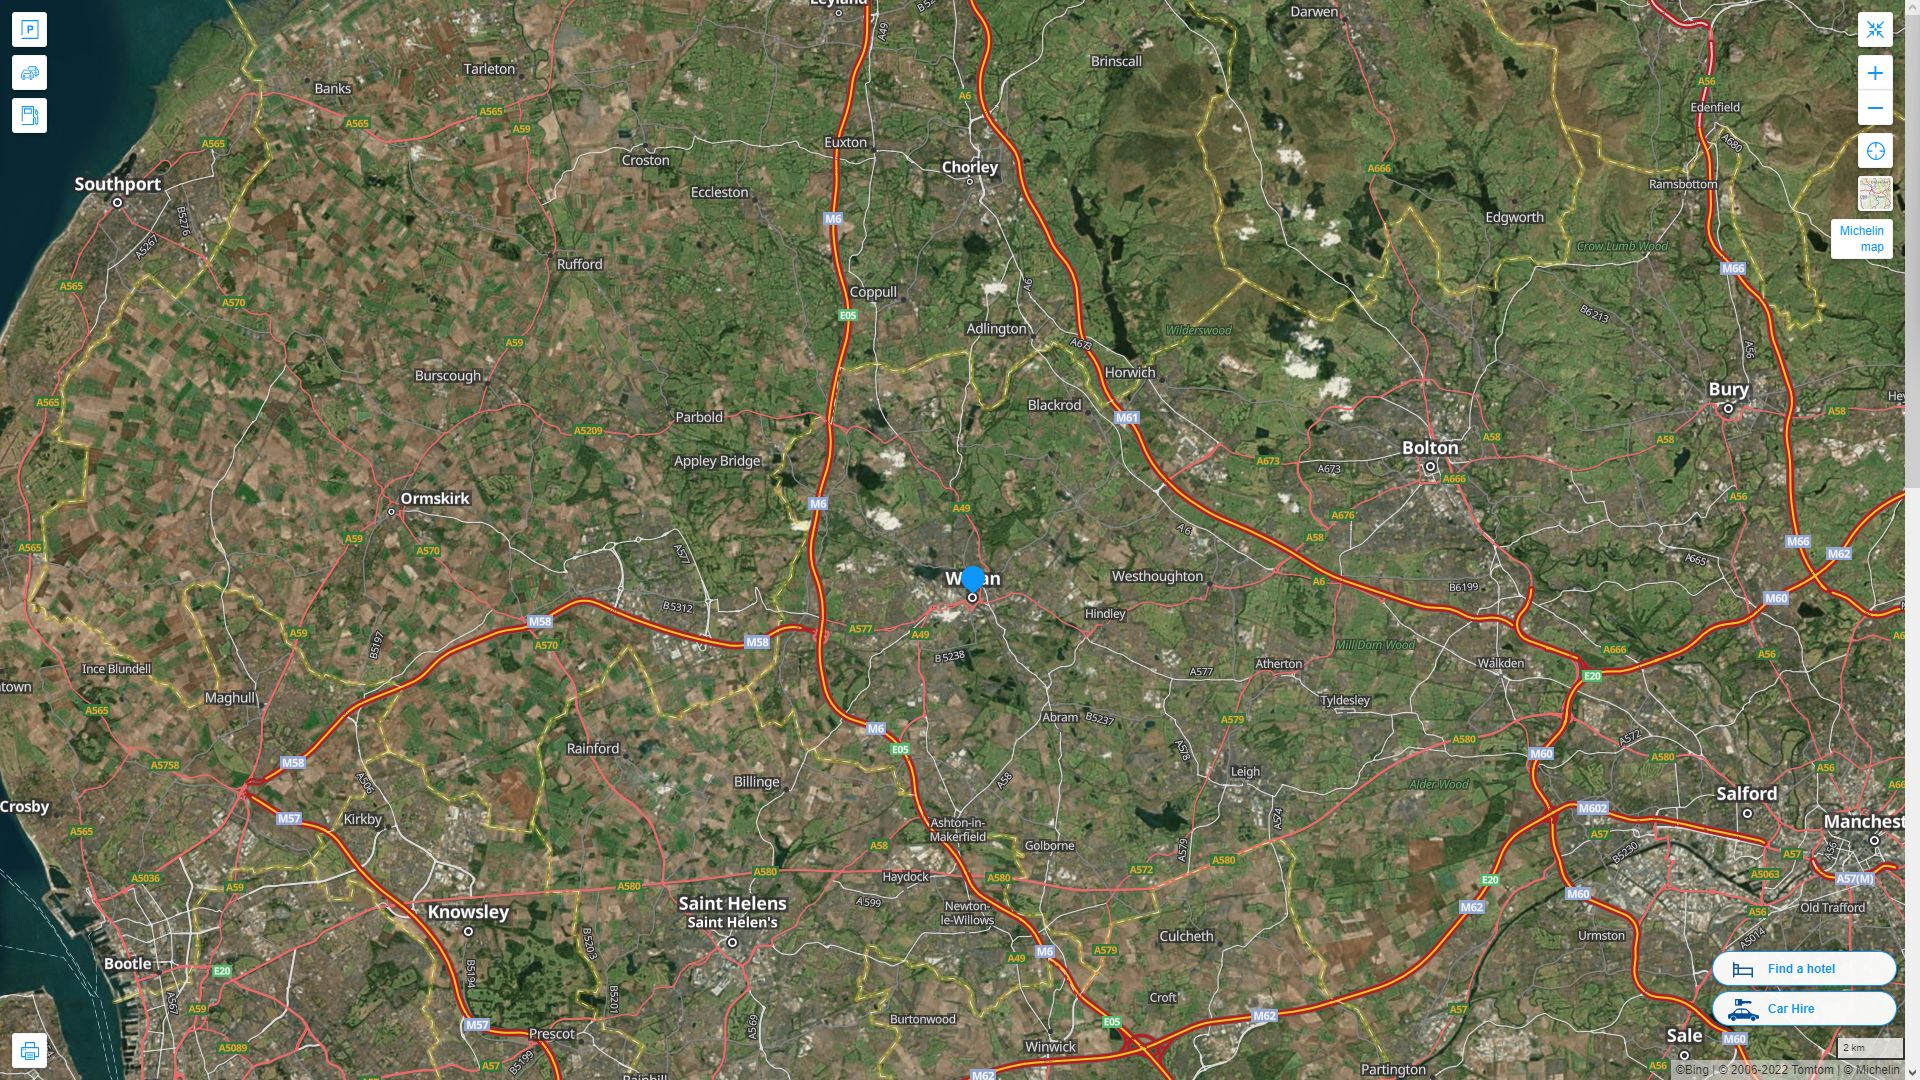 Wigan Highway and Road Map with Satellite View